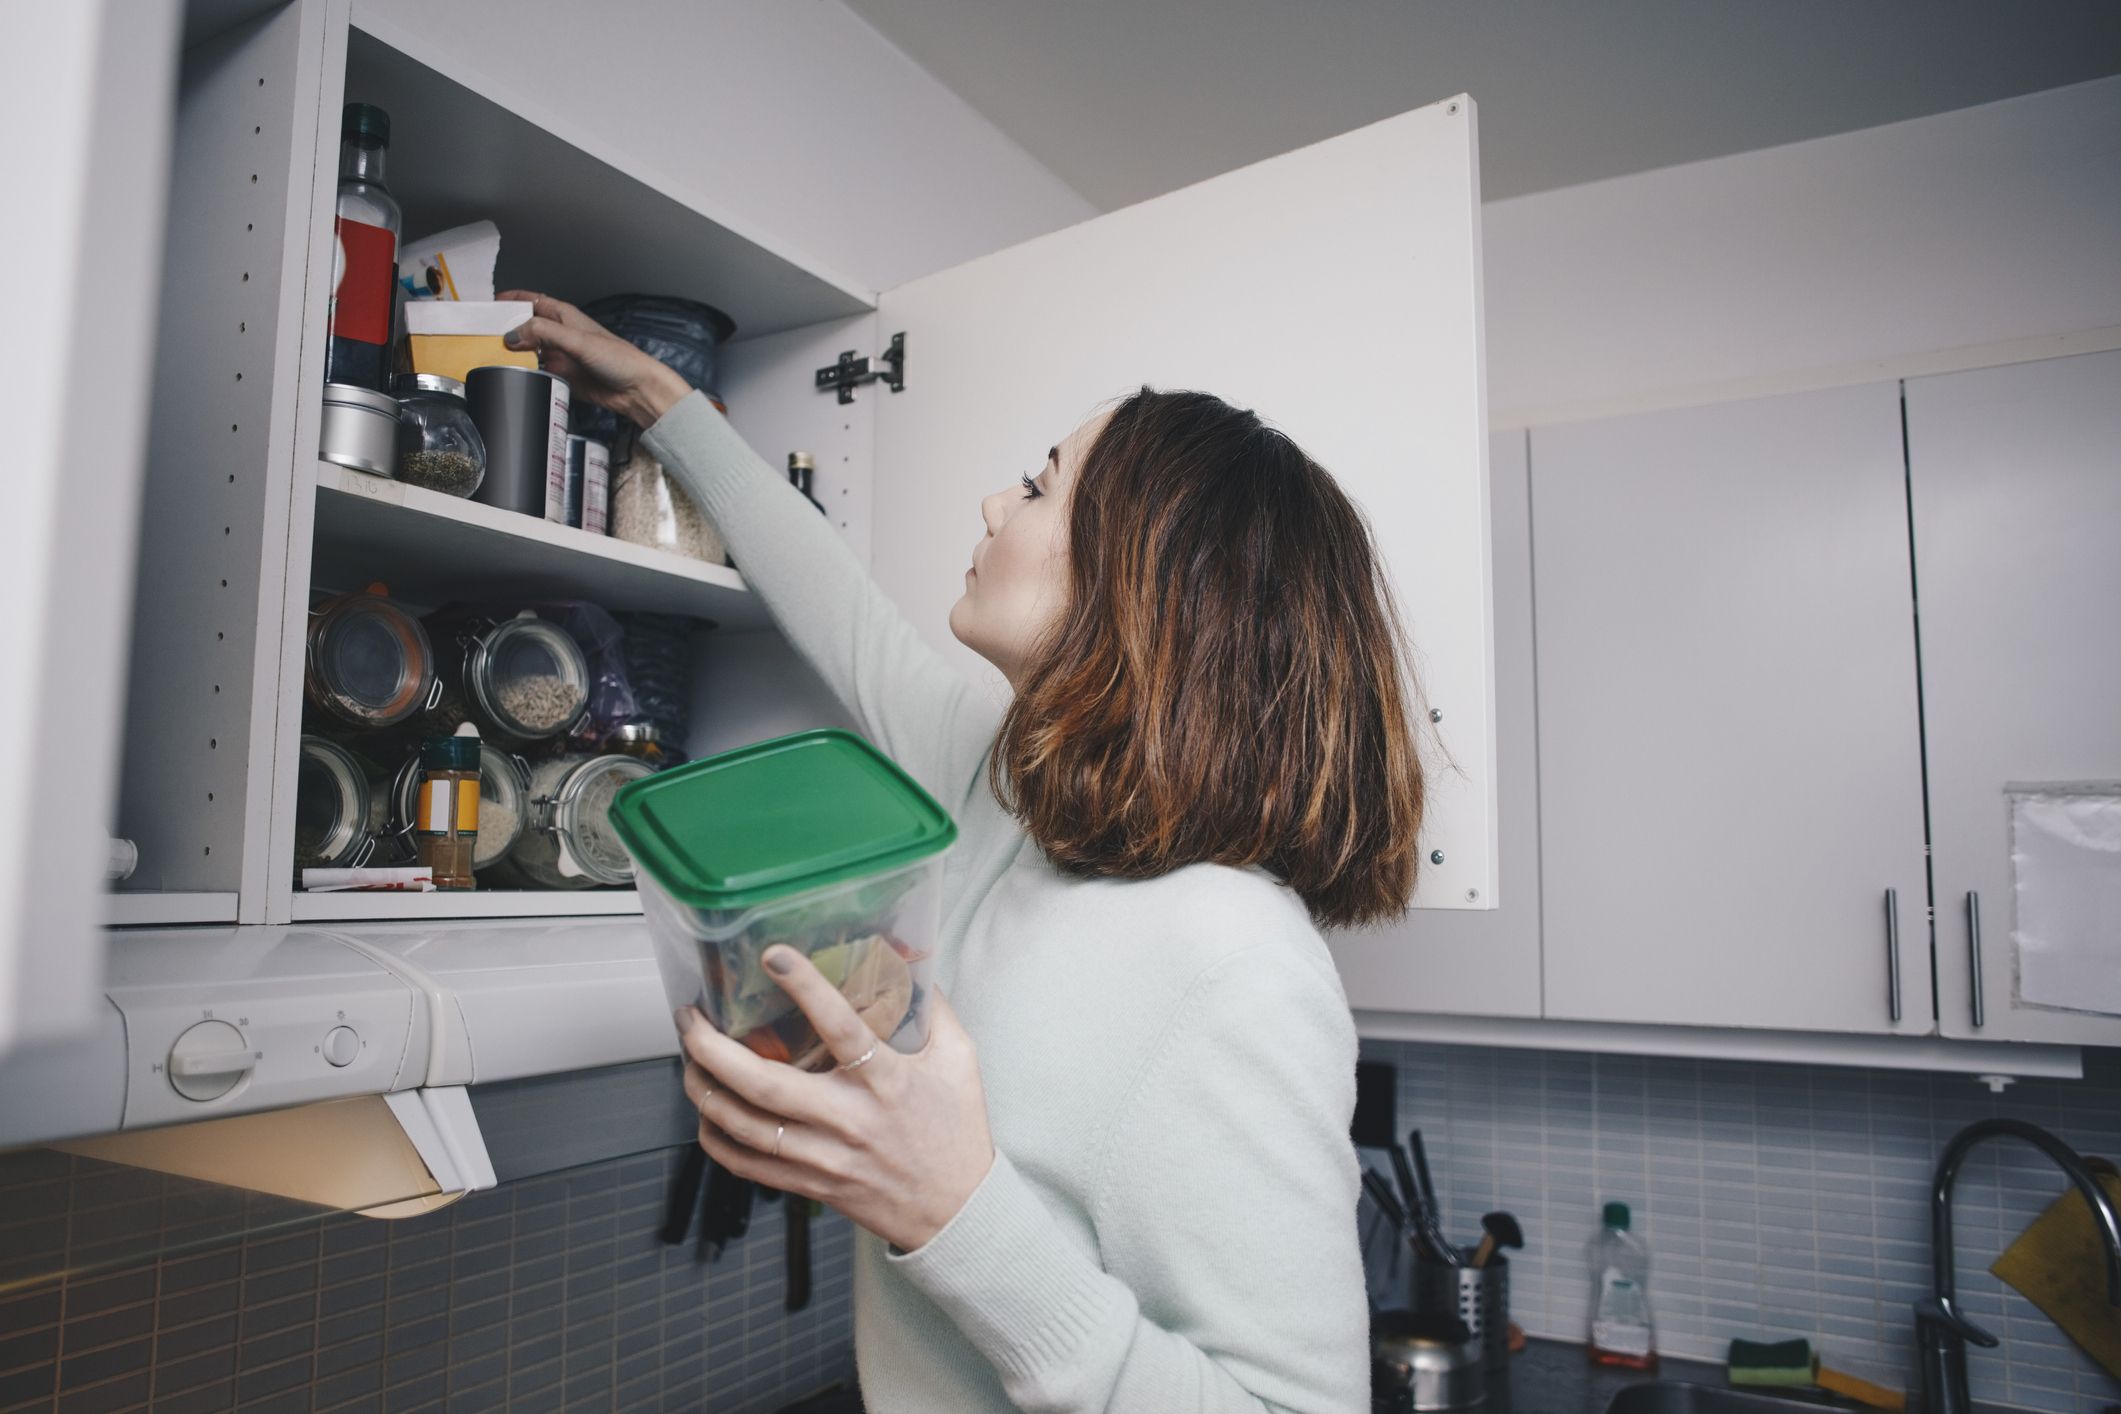 The Best Way to Clean Fridge Shelves and Bins? With a Dishwasher